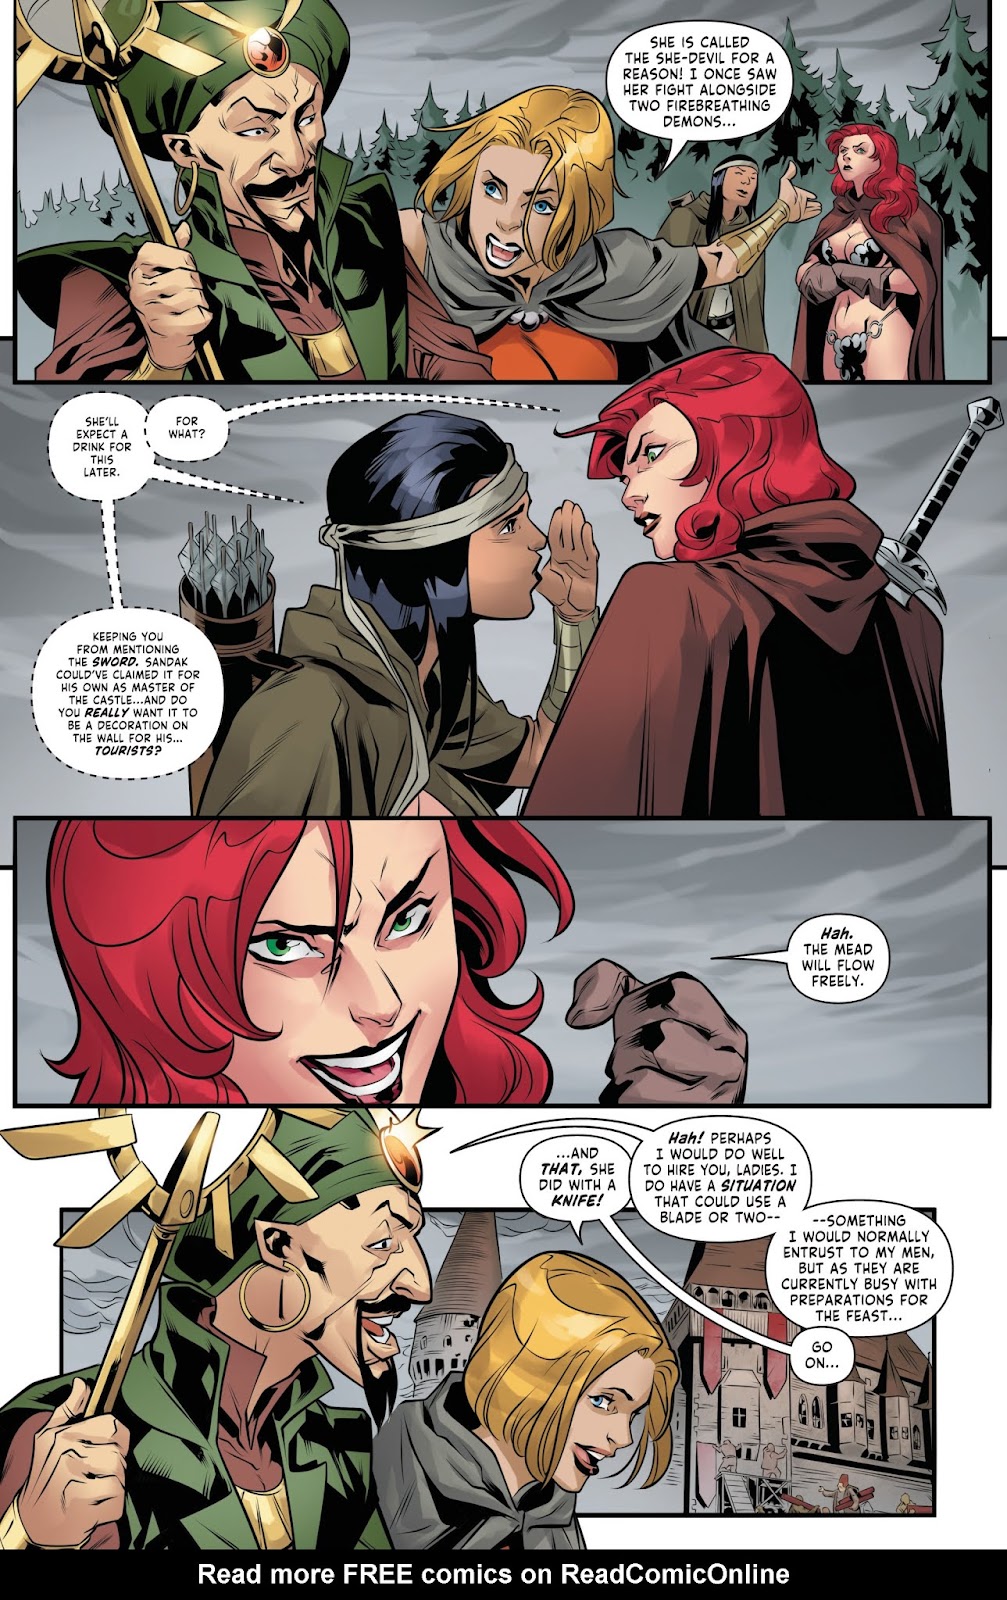 Red Sonja Vol. 4 issue 18 - Page 23